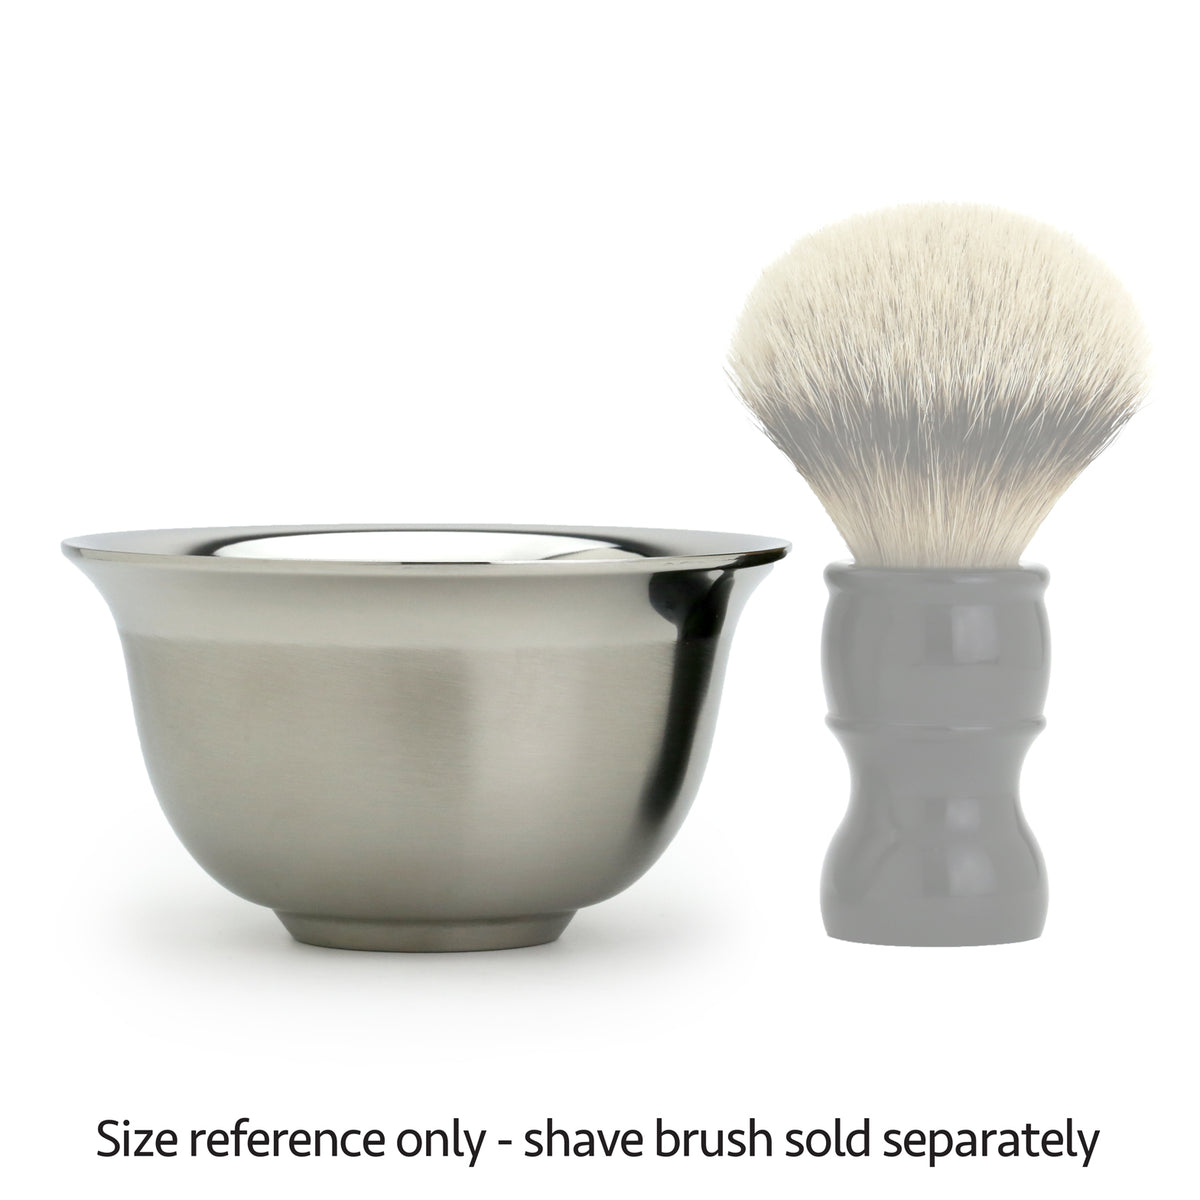 Size reference image of the stainless steel bowl next to the Stray Whisker Shaving Brush - shave brush is sold separately